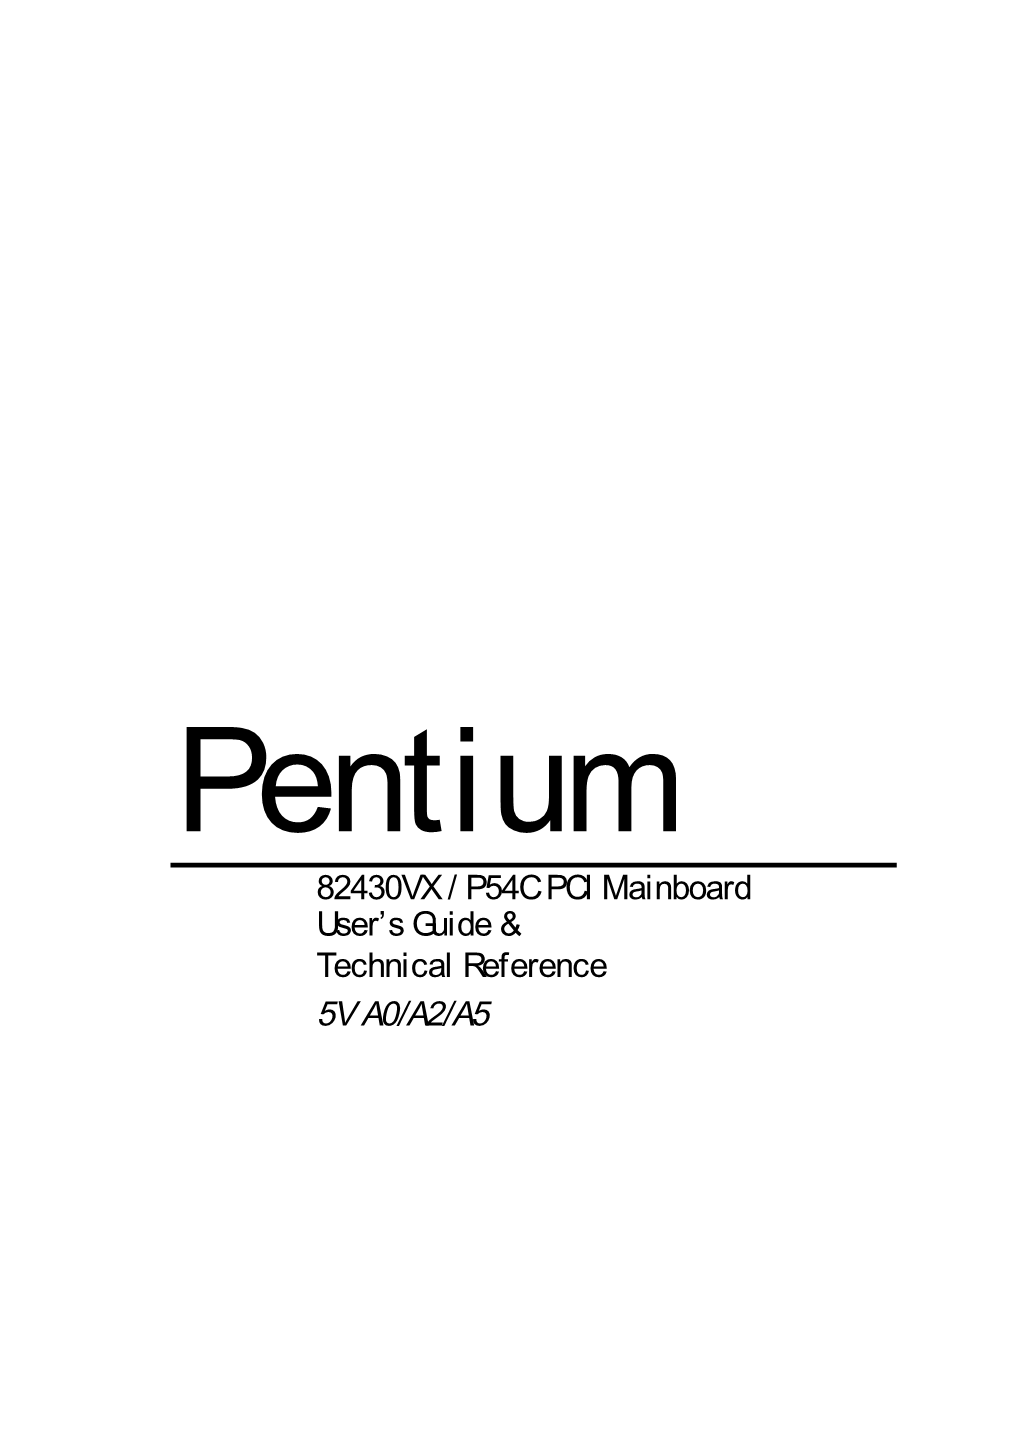 Pentium 82430VX / P54C PCI Mainboard User’S Guide & Technical Reference 5V A0/A2/A5 Ii ¨ ª